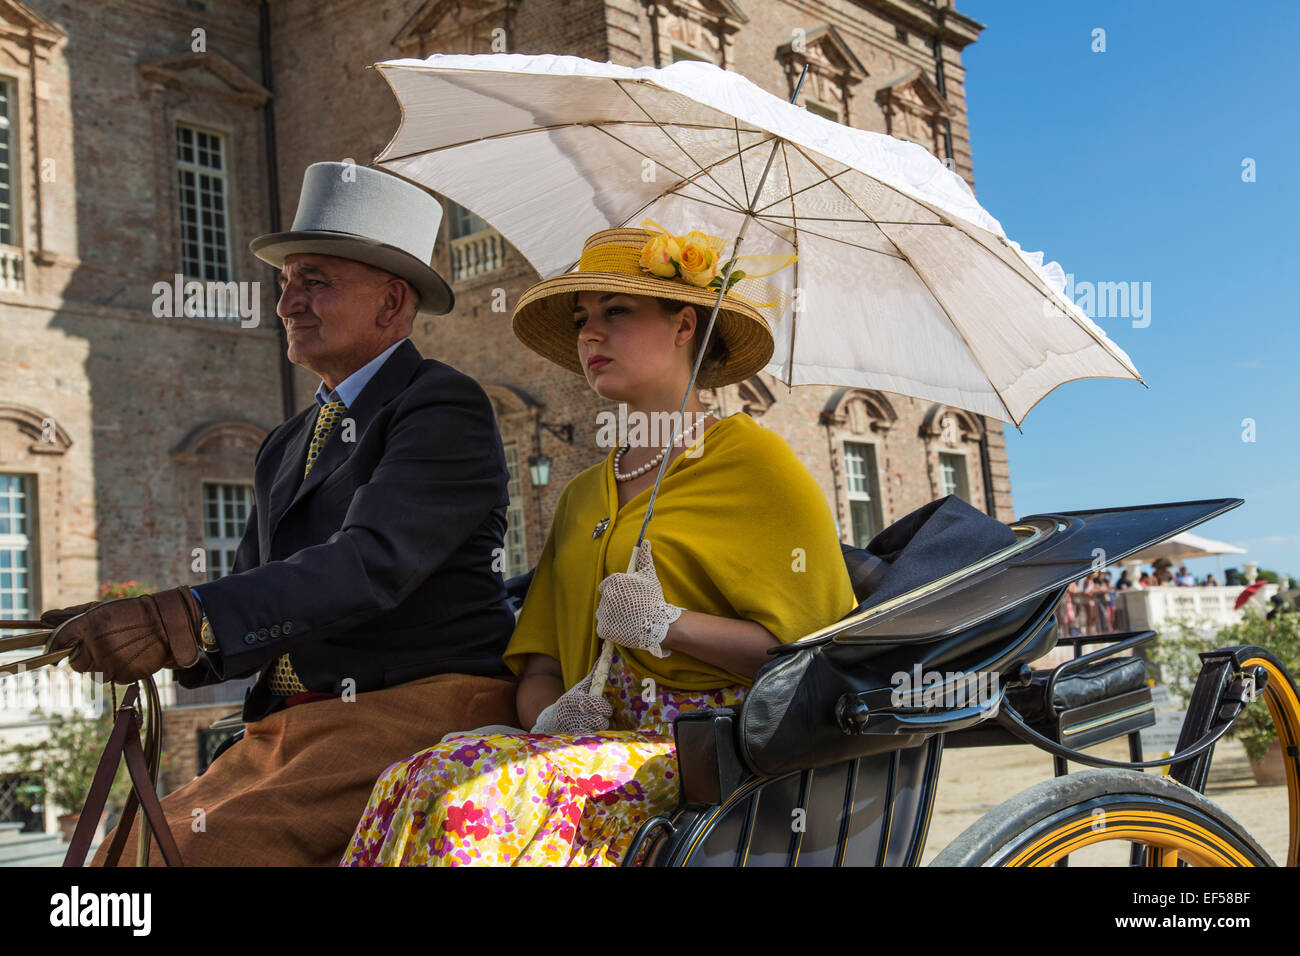 International competition for traditional carriages 'La Venaria Reale'competitors wearing the dress code,Italy Stock Photo